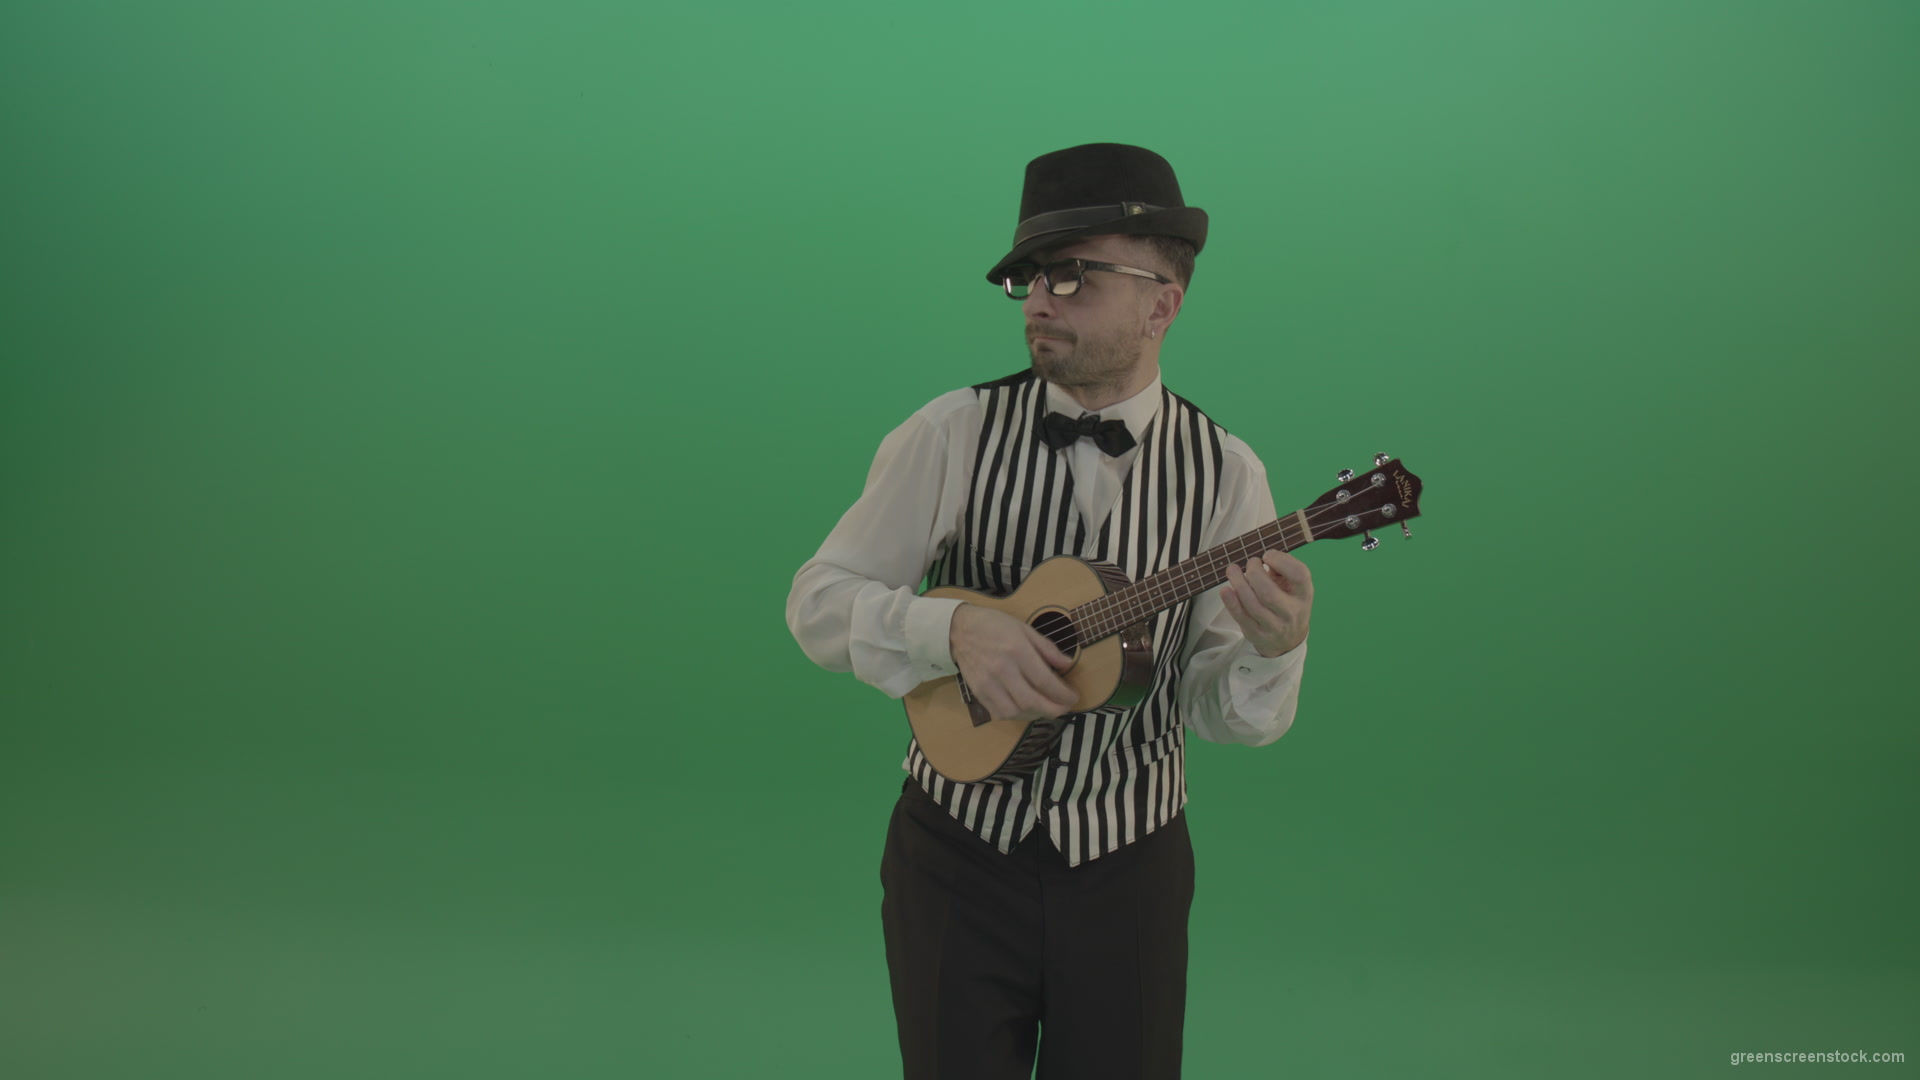 Funny-guitar-player-with-small-classic-guitar-on-chromakey-green-screen_009 Green Screen Stock